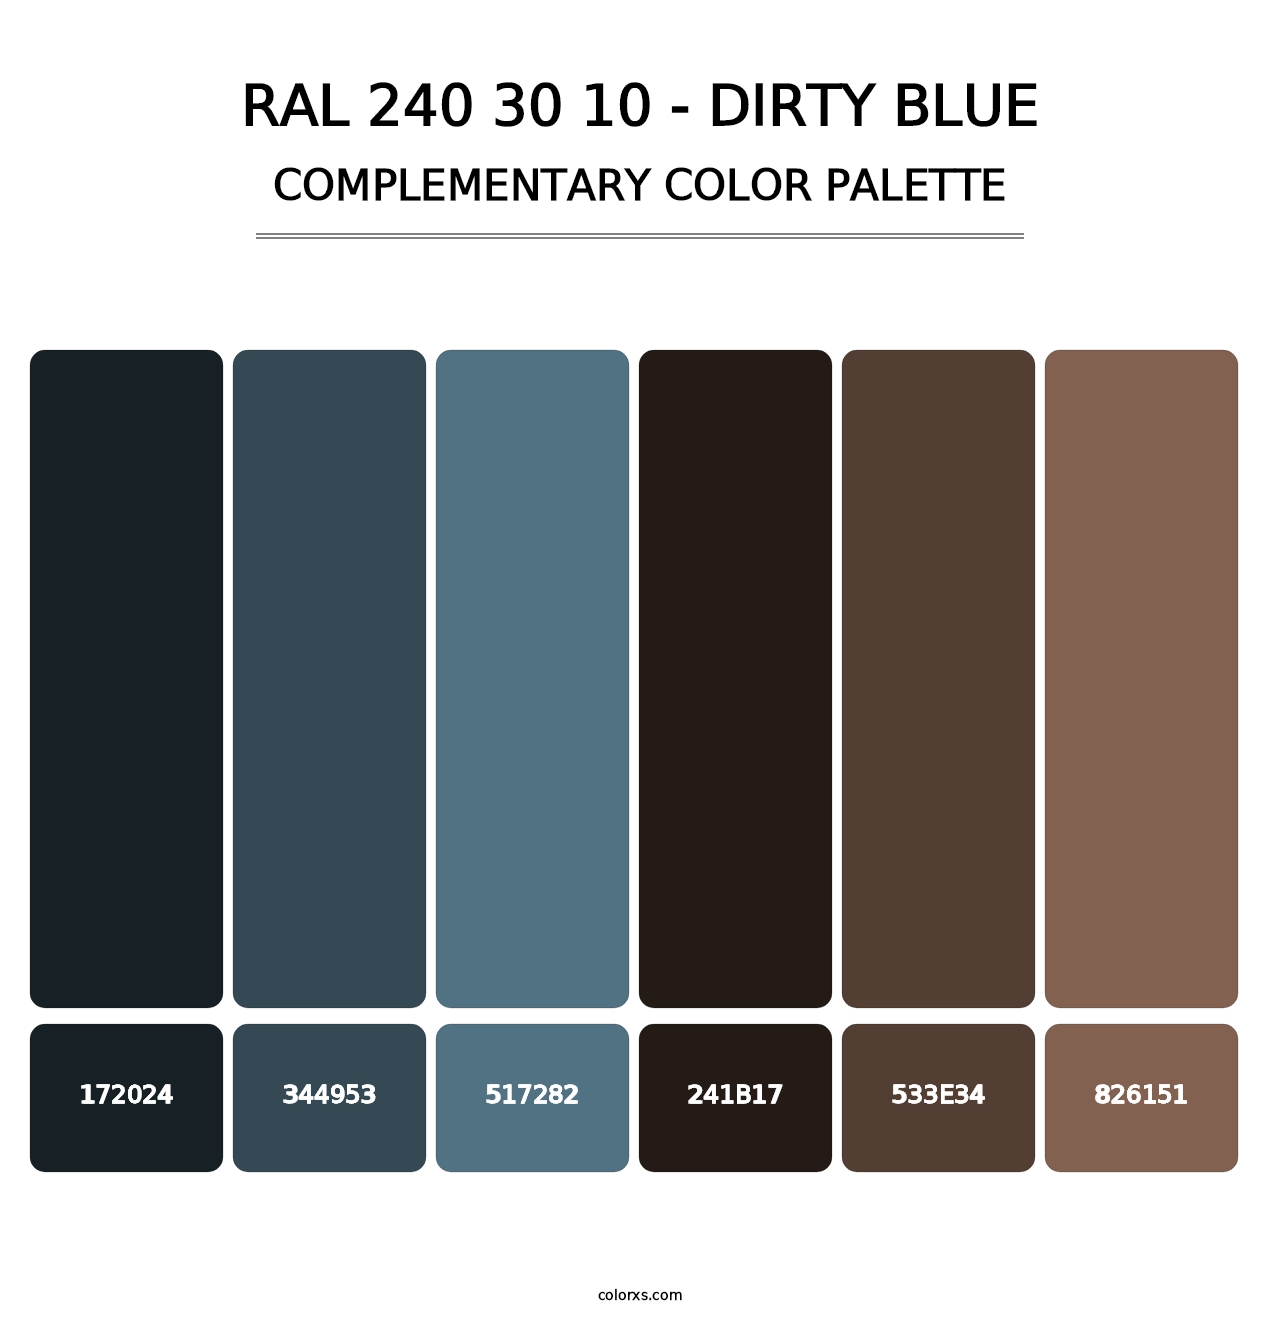 RAL 240 30 10 - Dirty Blue - Complementary Color Palette